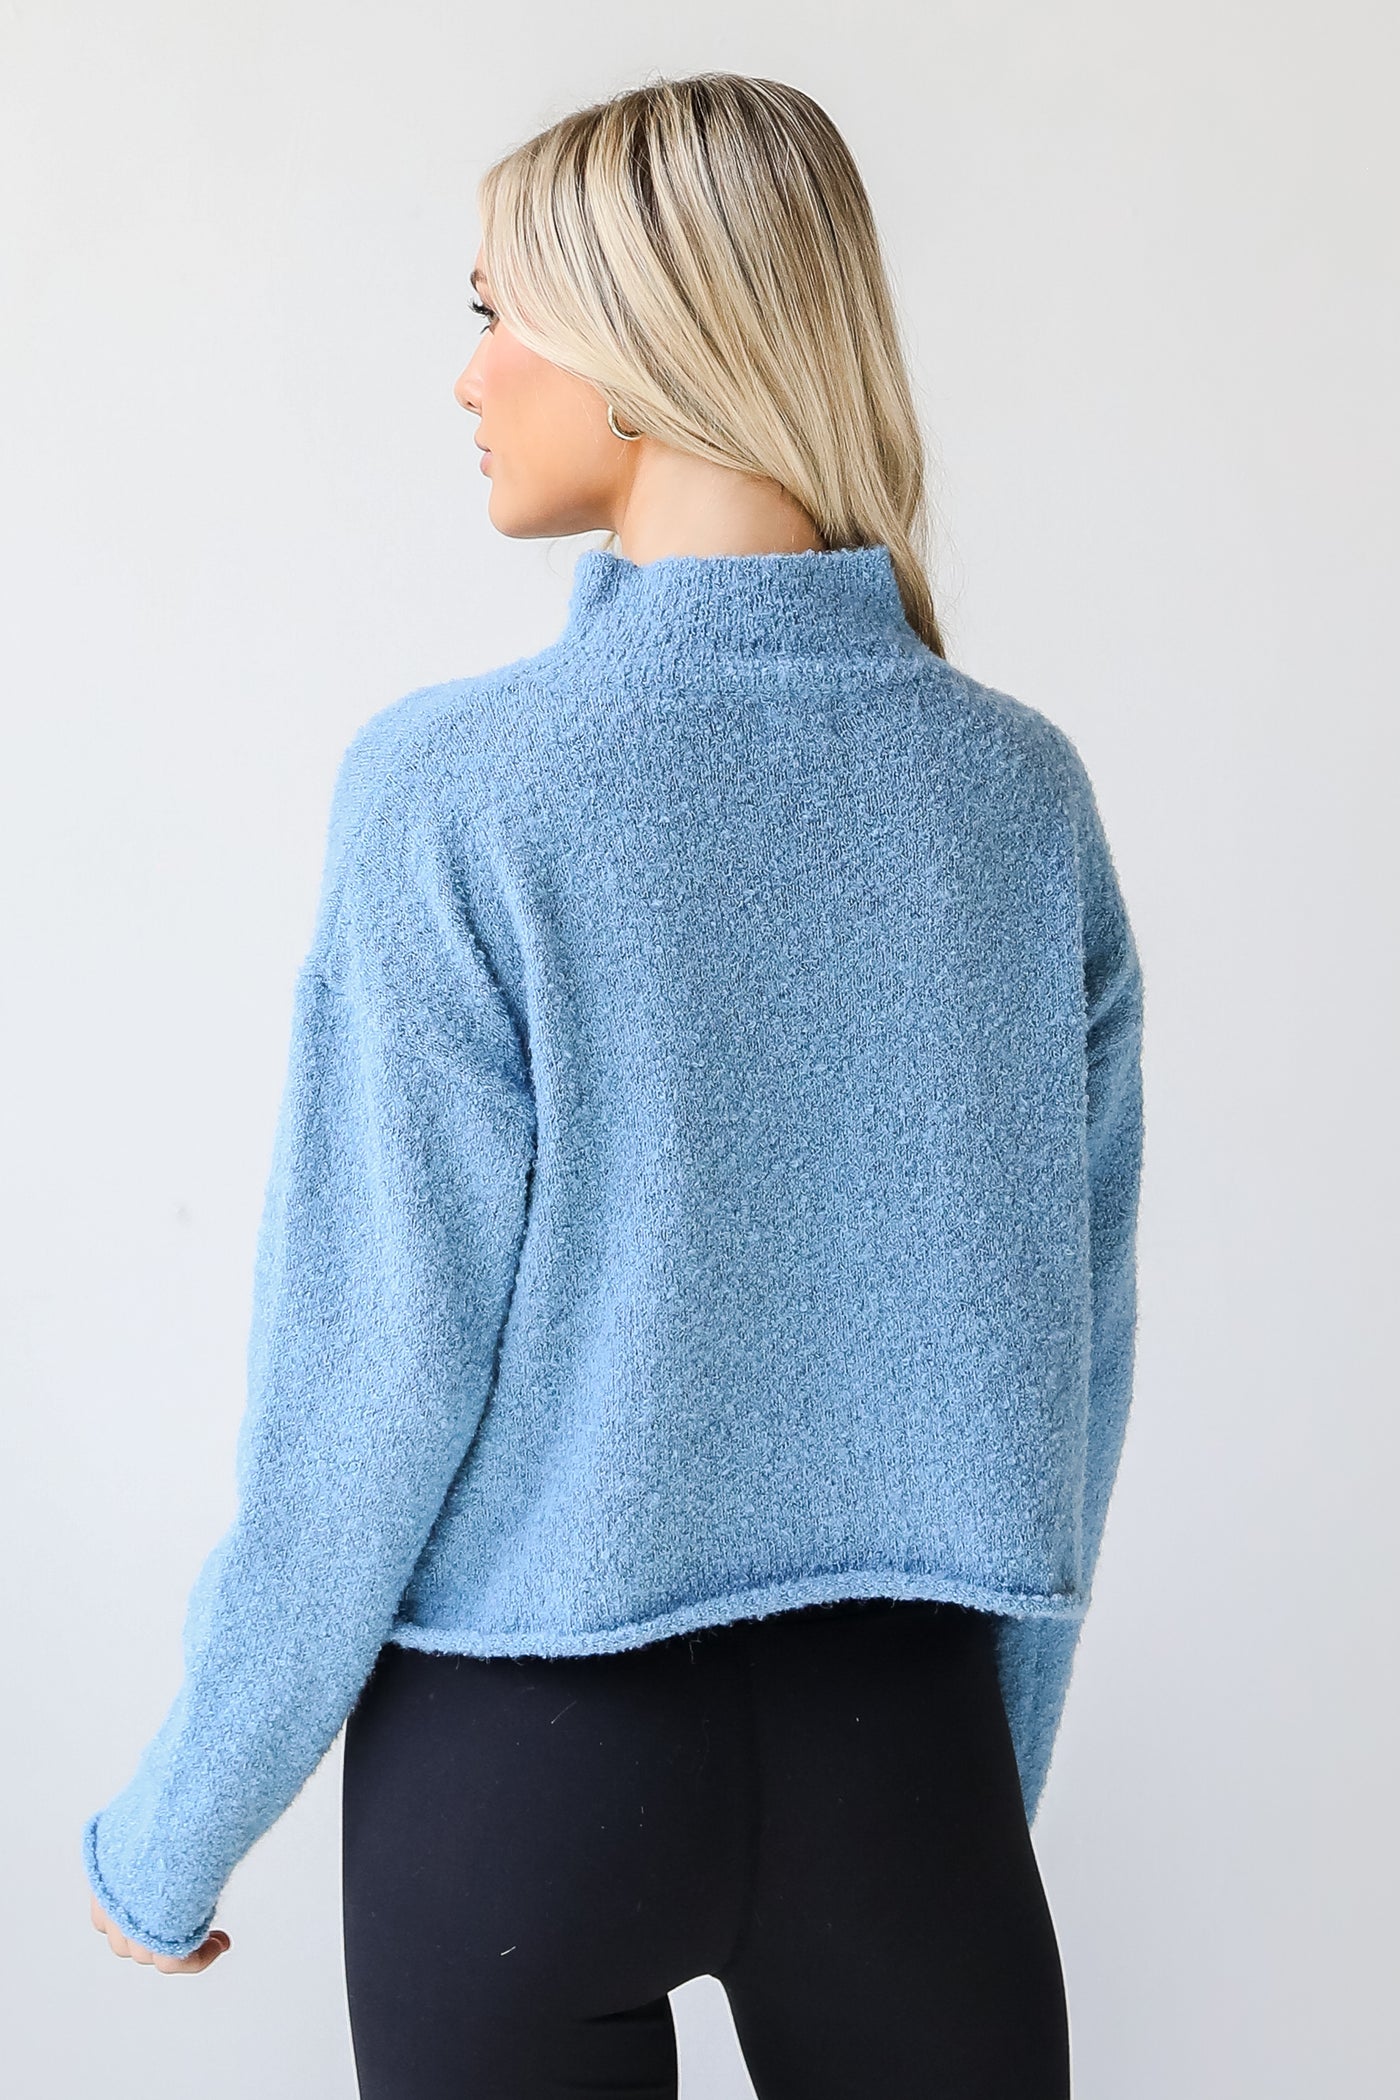 Sweater in blue back view